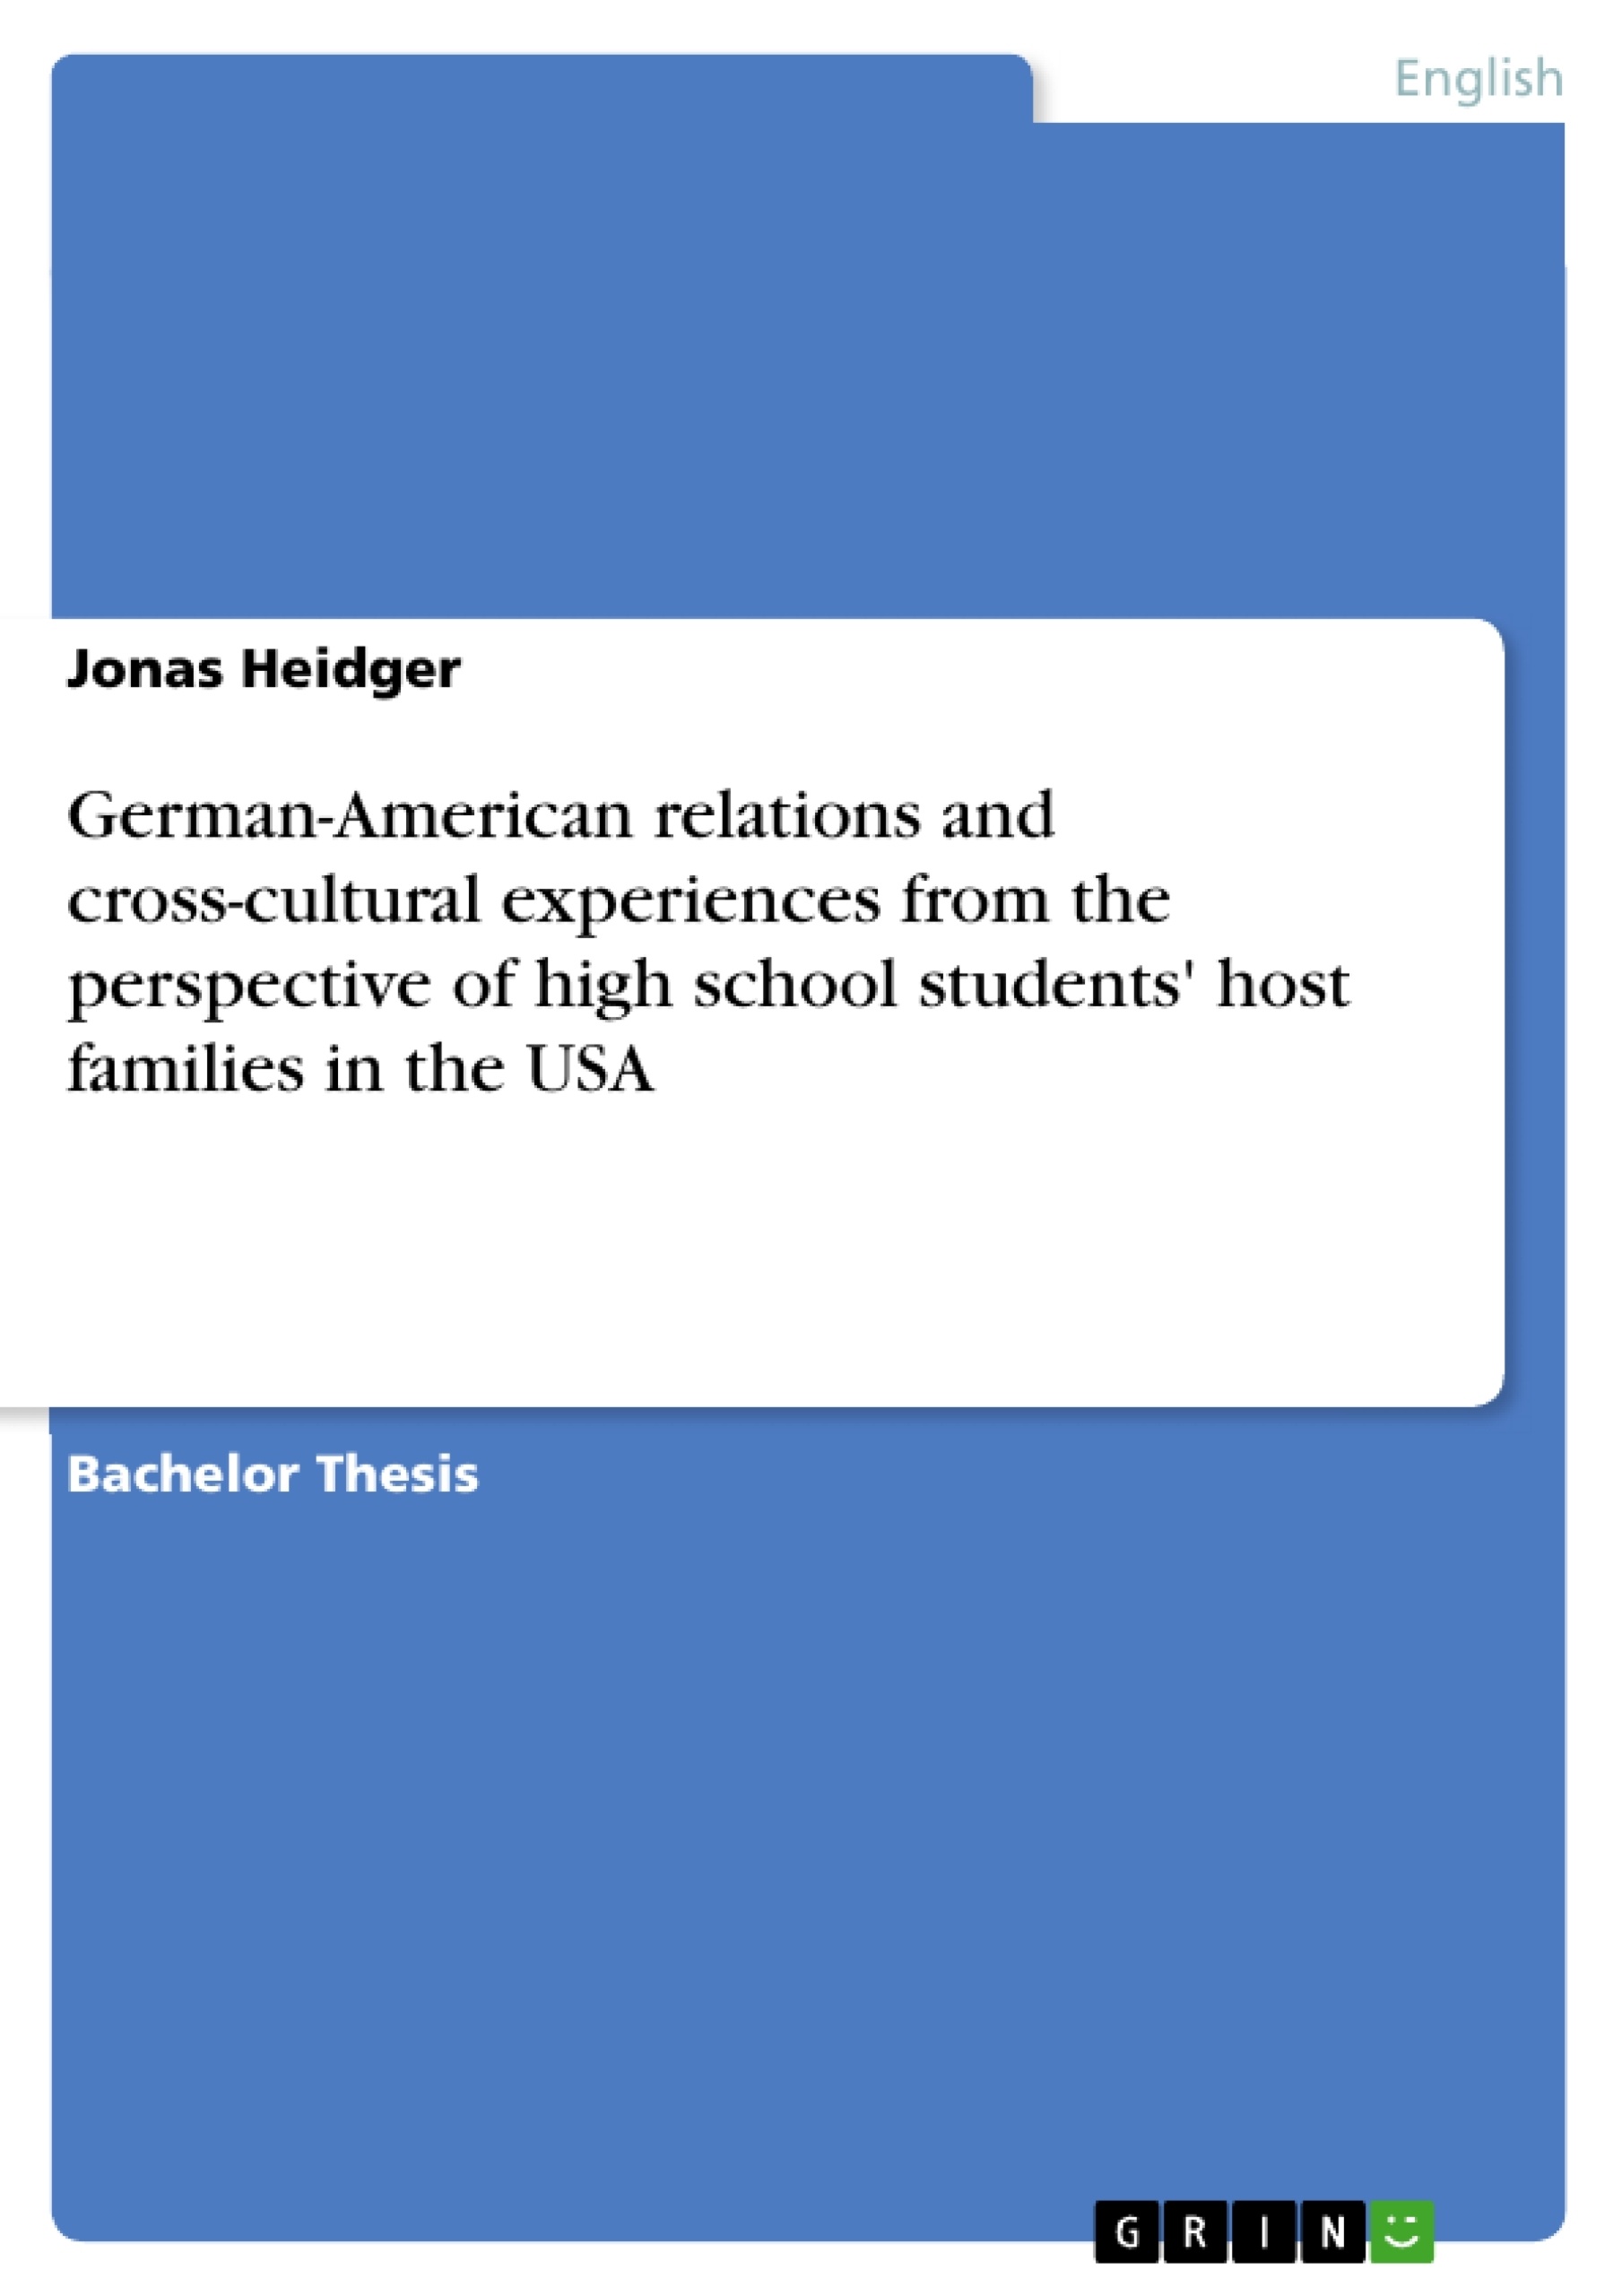 Titre: German-American relations and cross-cultural experiences from the perspective of high school students' host families in the USA